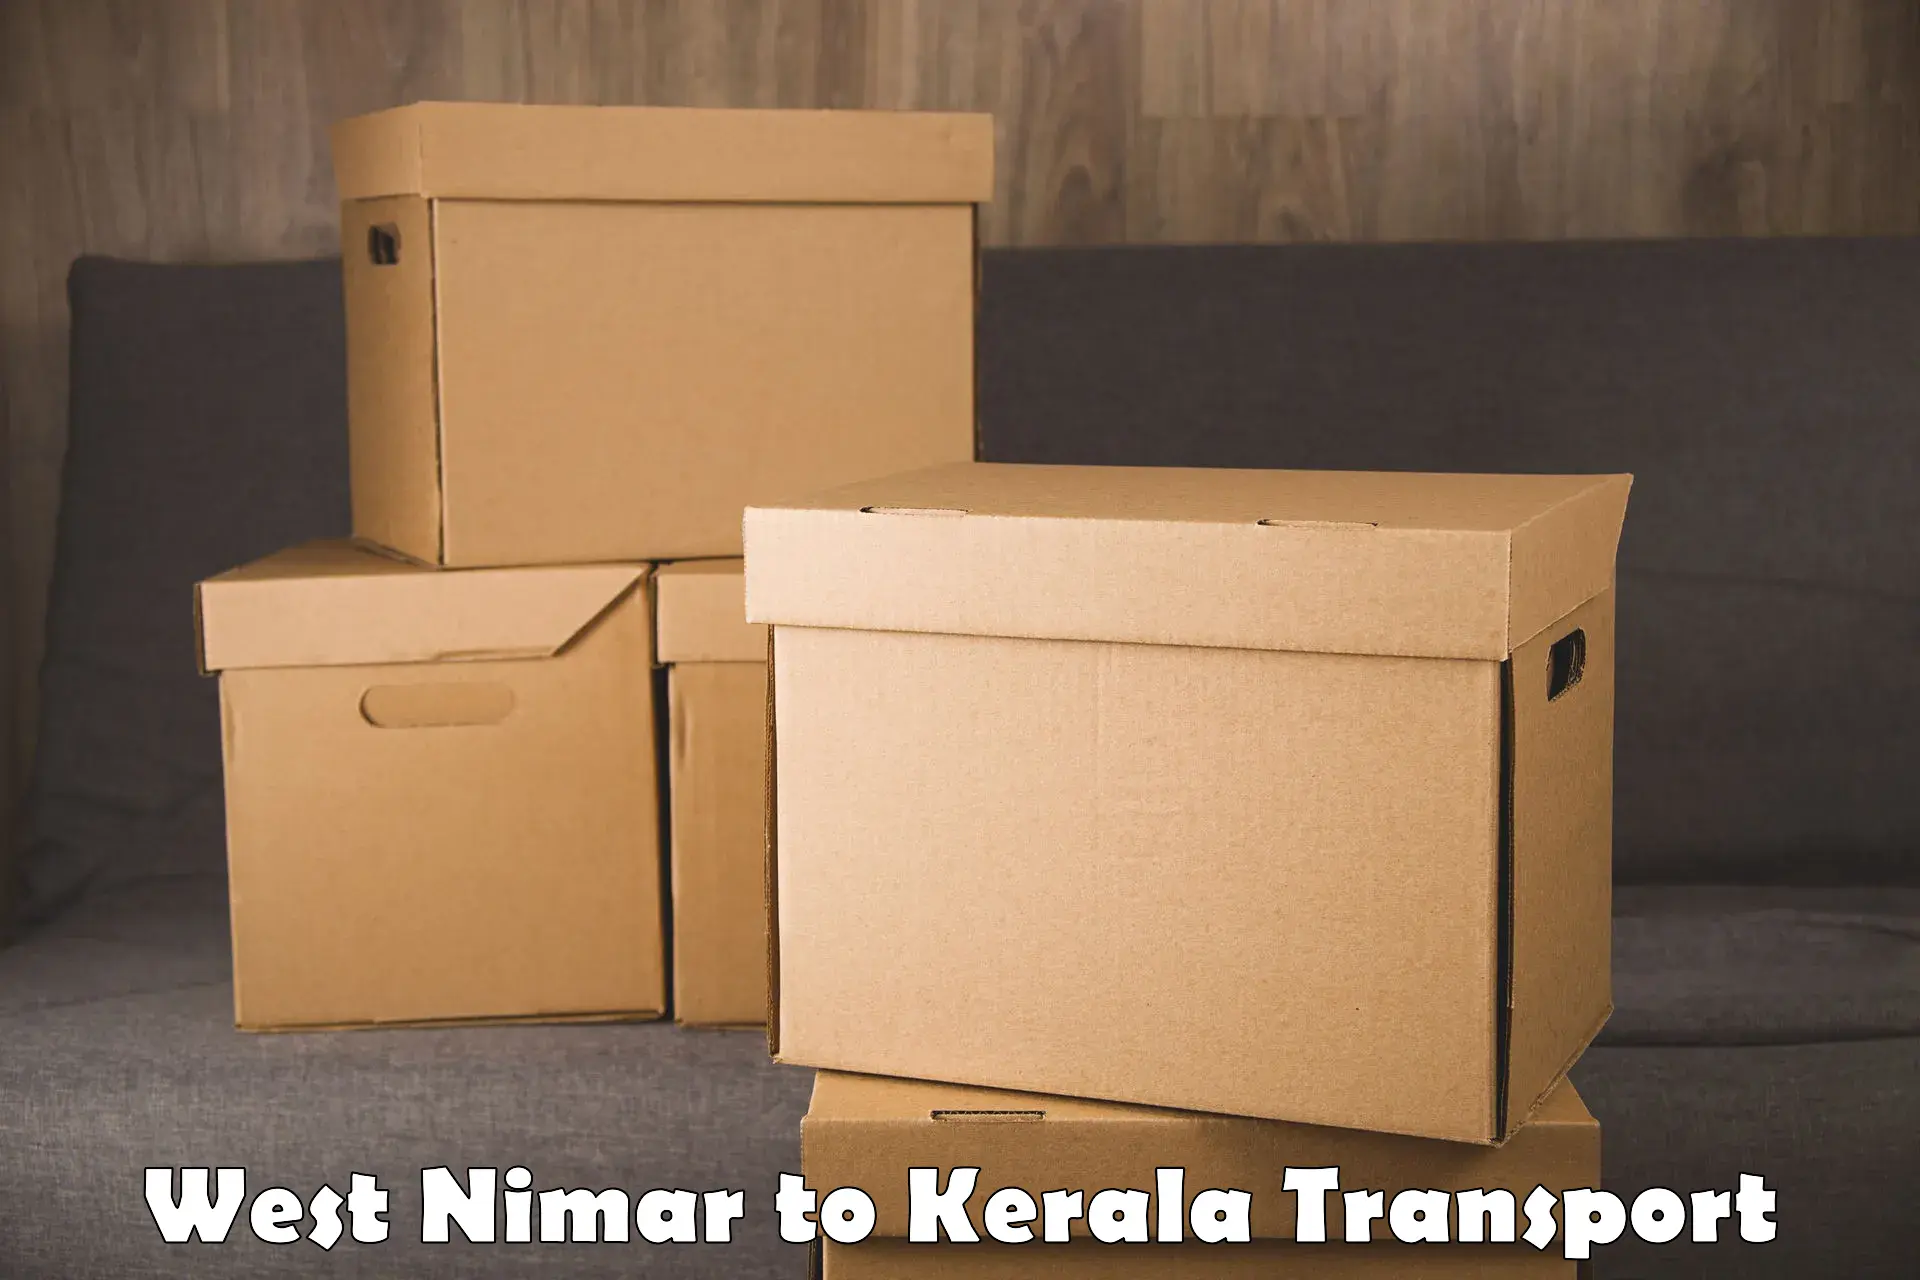 Container transportation services West Nimar to Mahe